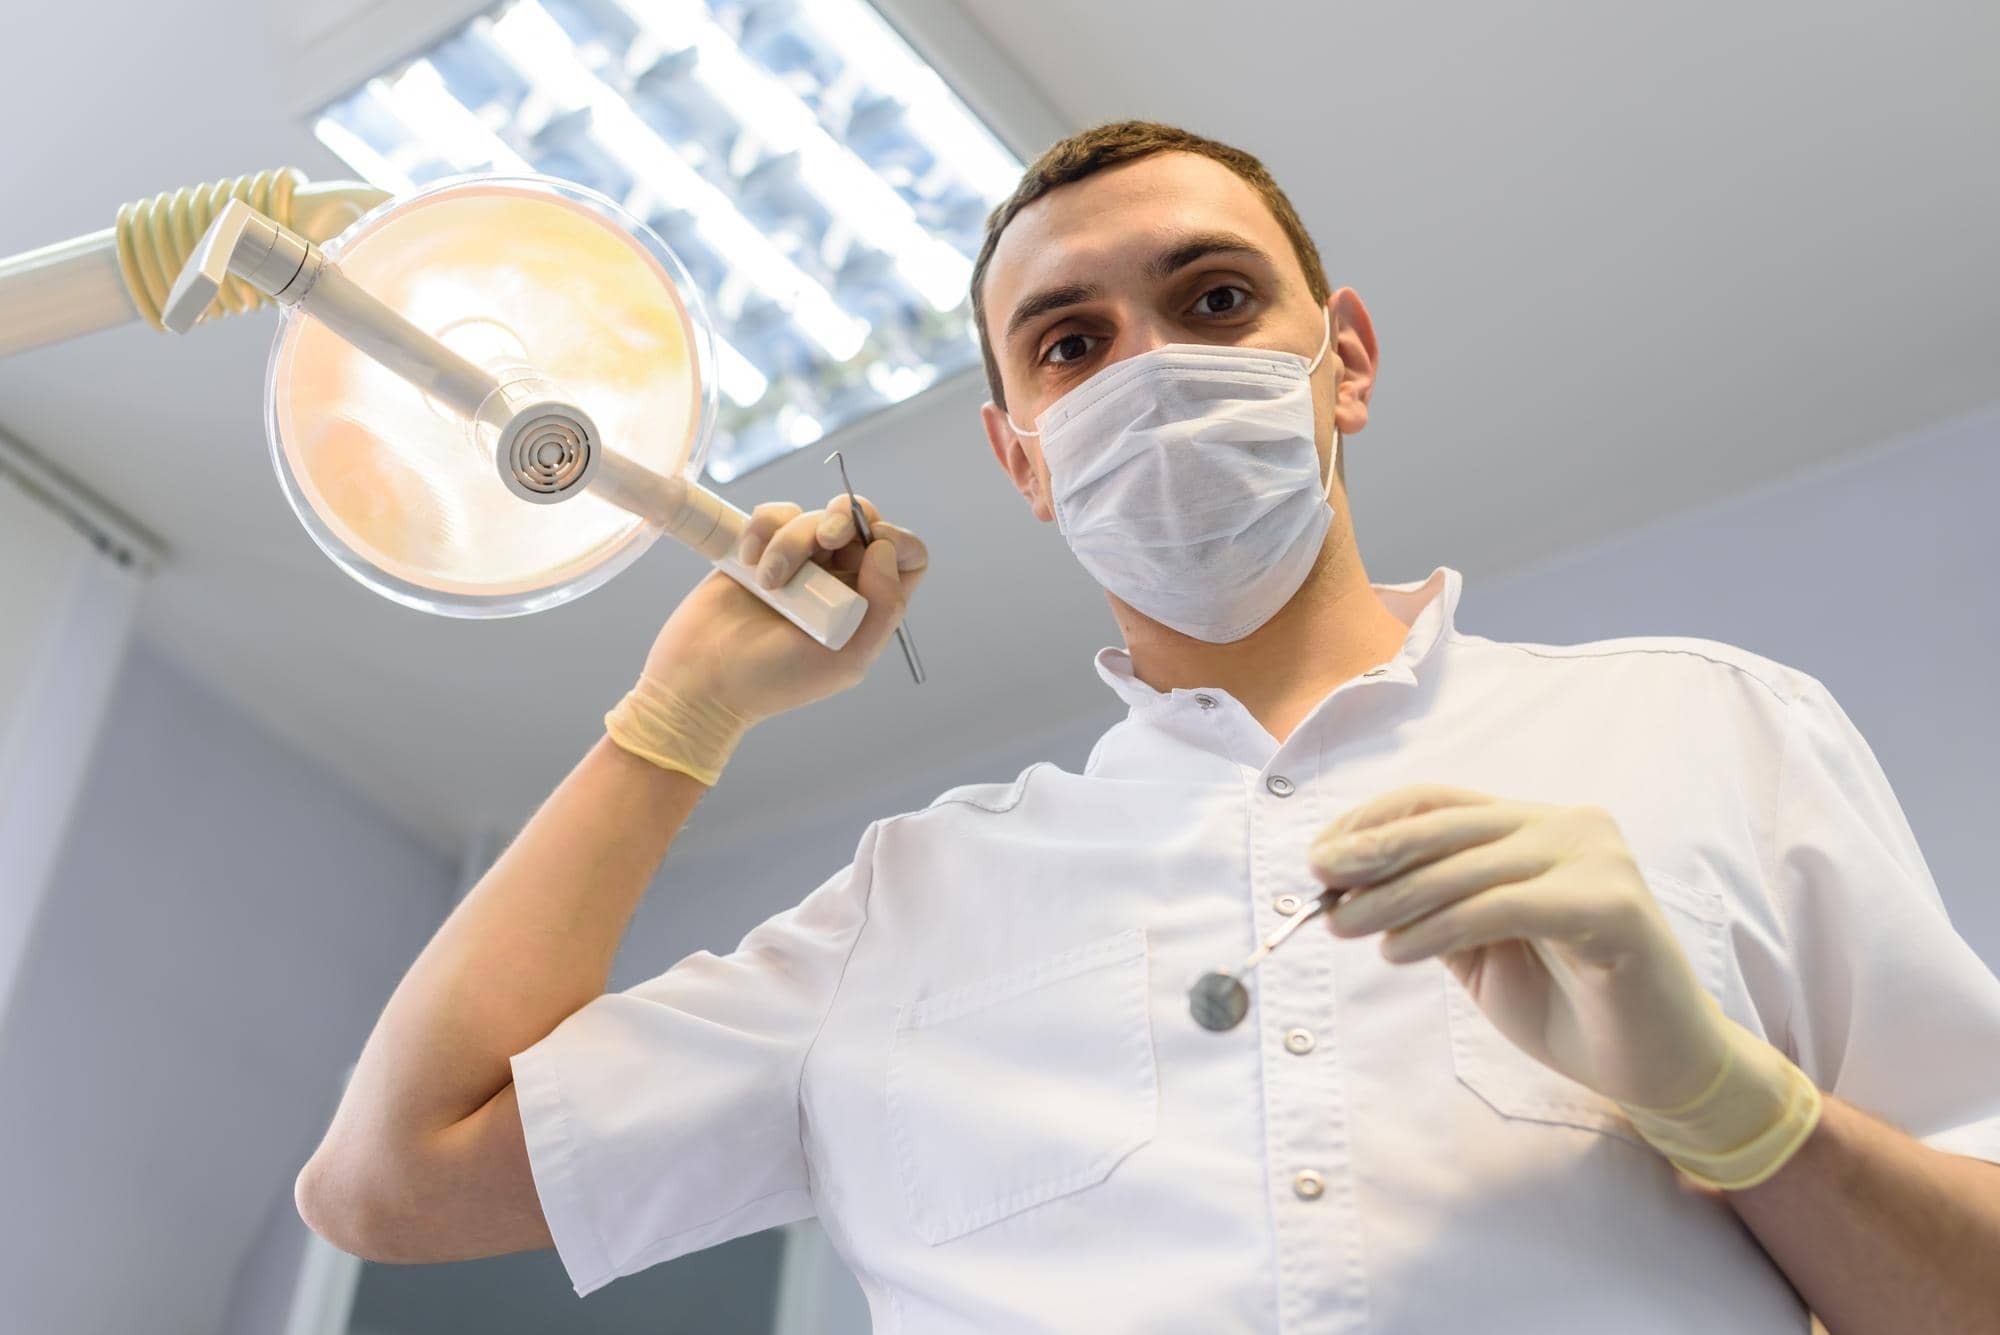 What Should I Look for in an Oral Surgeon?